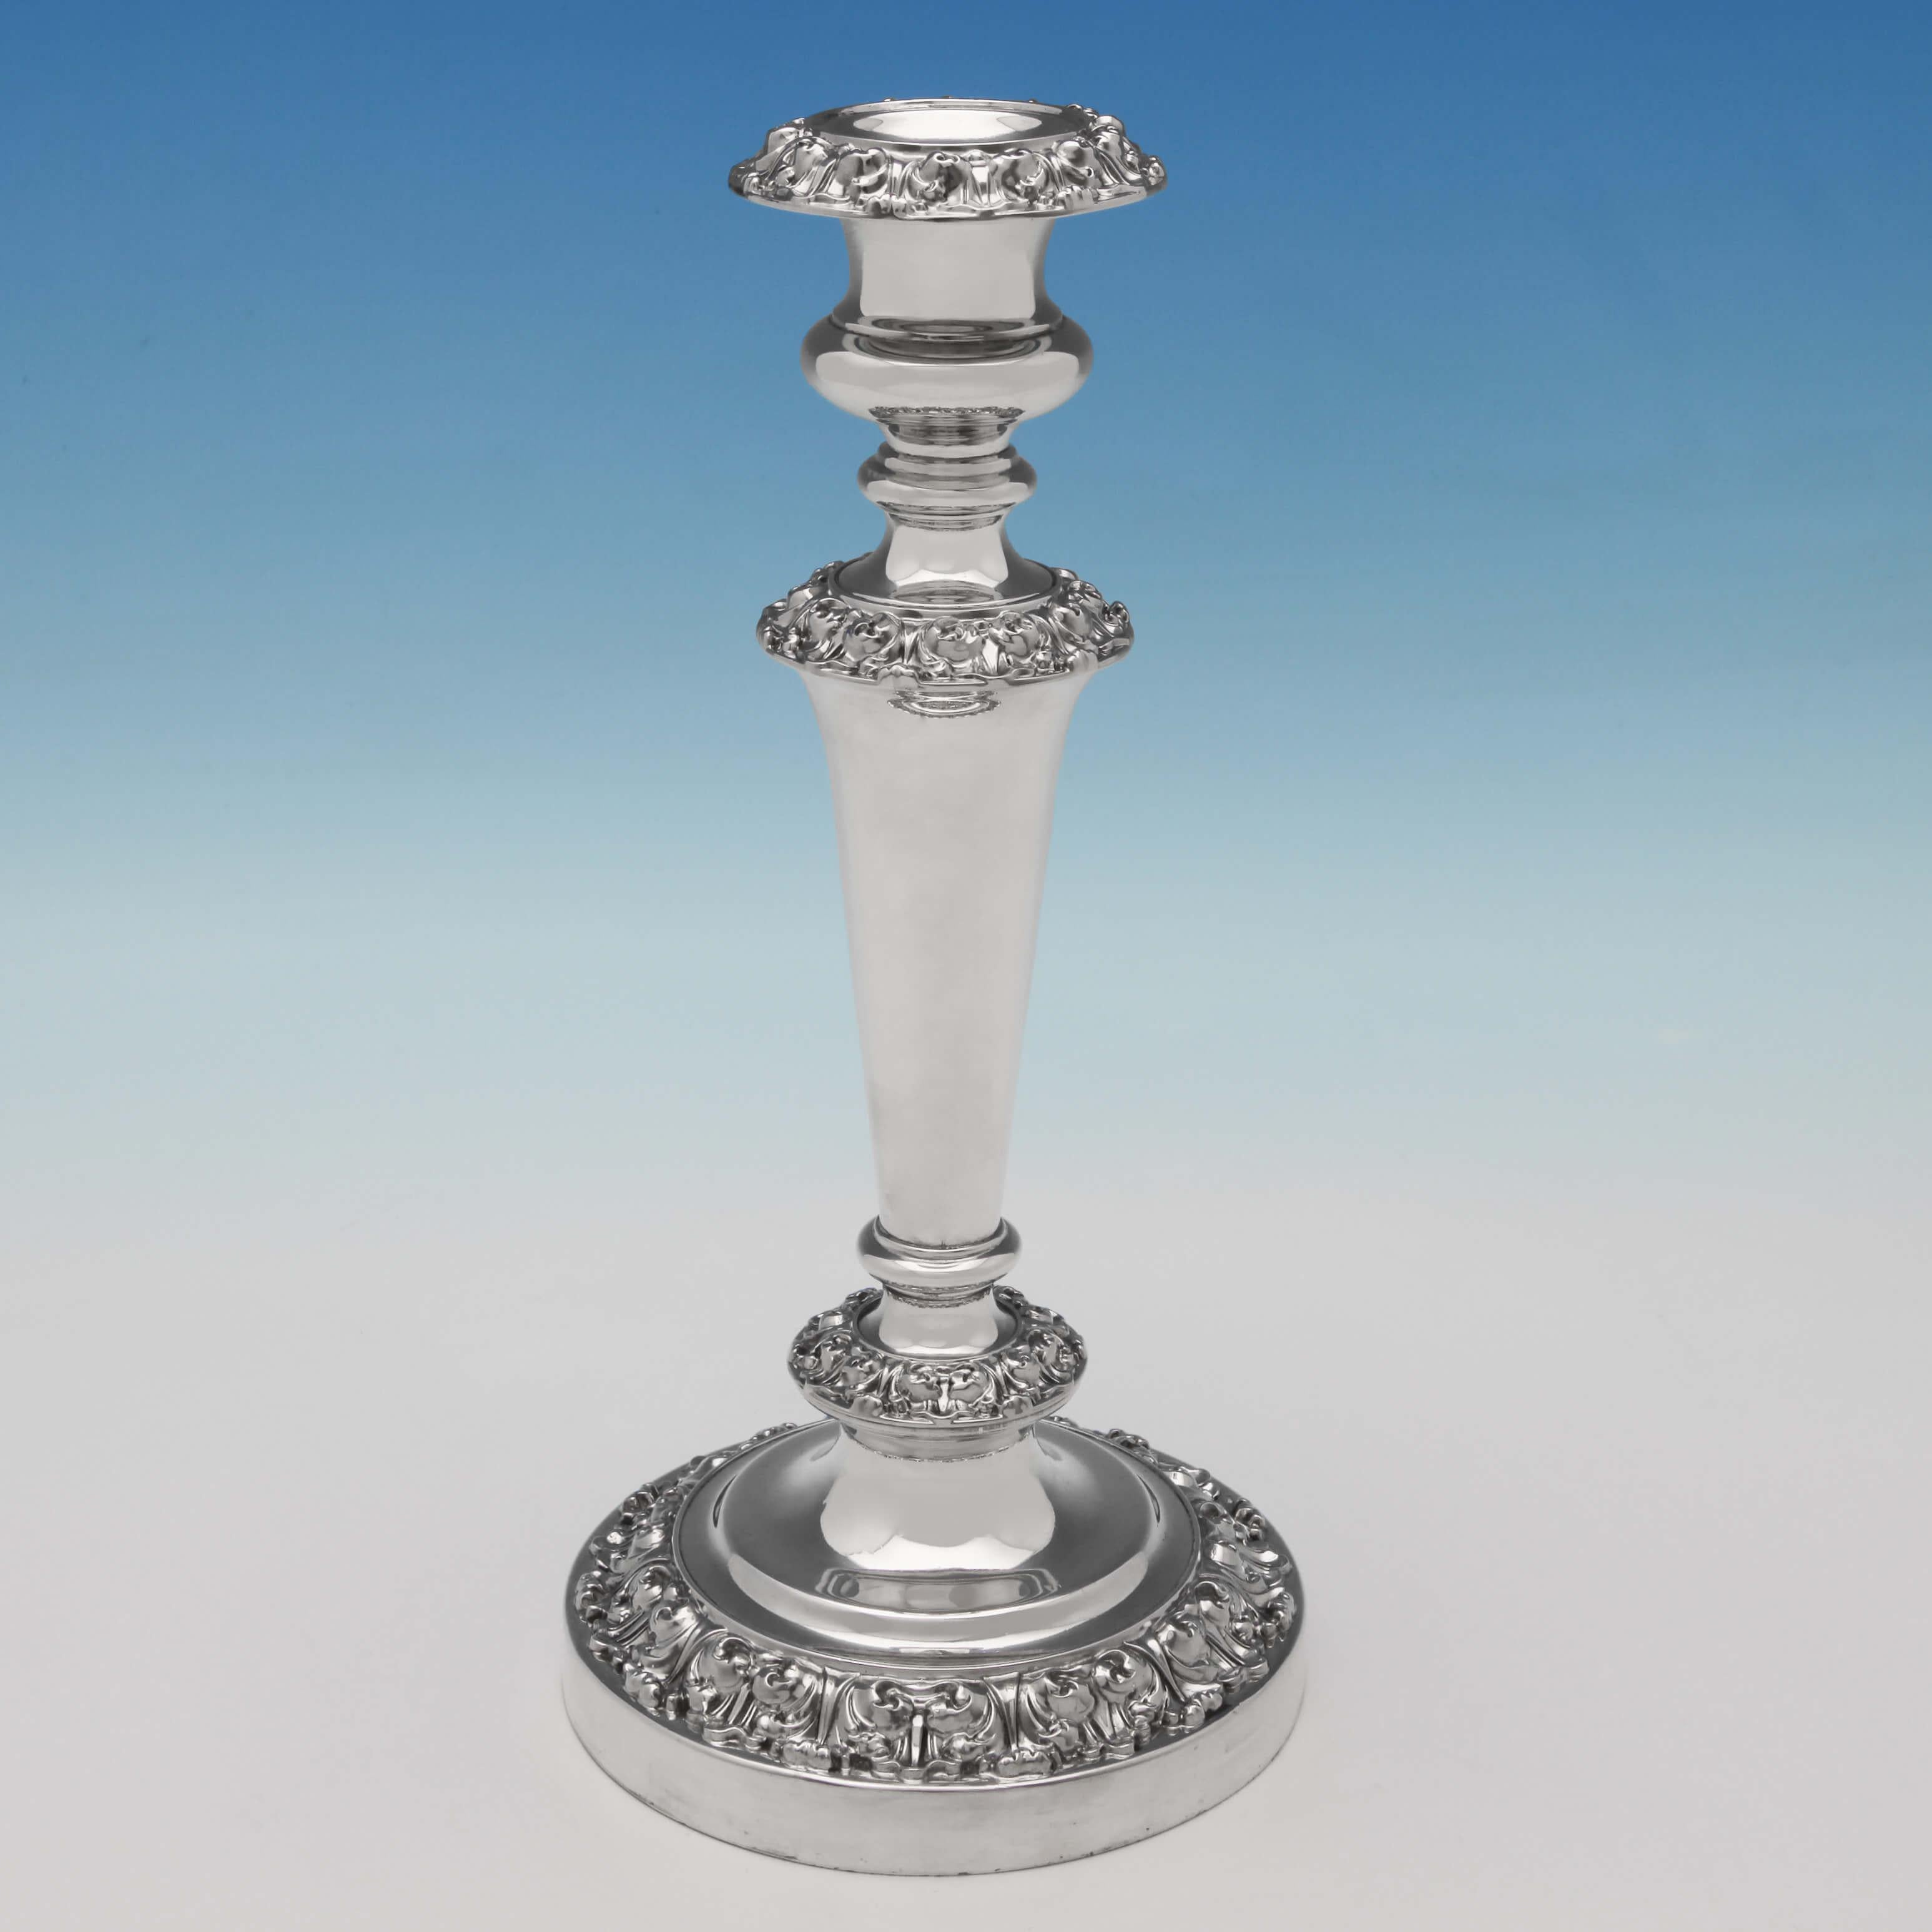 Hallmarked in Sheffield in 1828 by Waterhouse, Hatfield & Co., this attractive, ornate, George IV, antique sterling silver set of four candlesticks, feature acanthus decoration around the bases, the top of the columns and on the removable sconces,